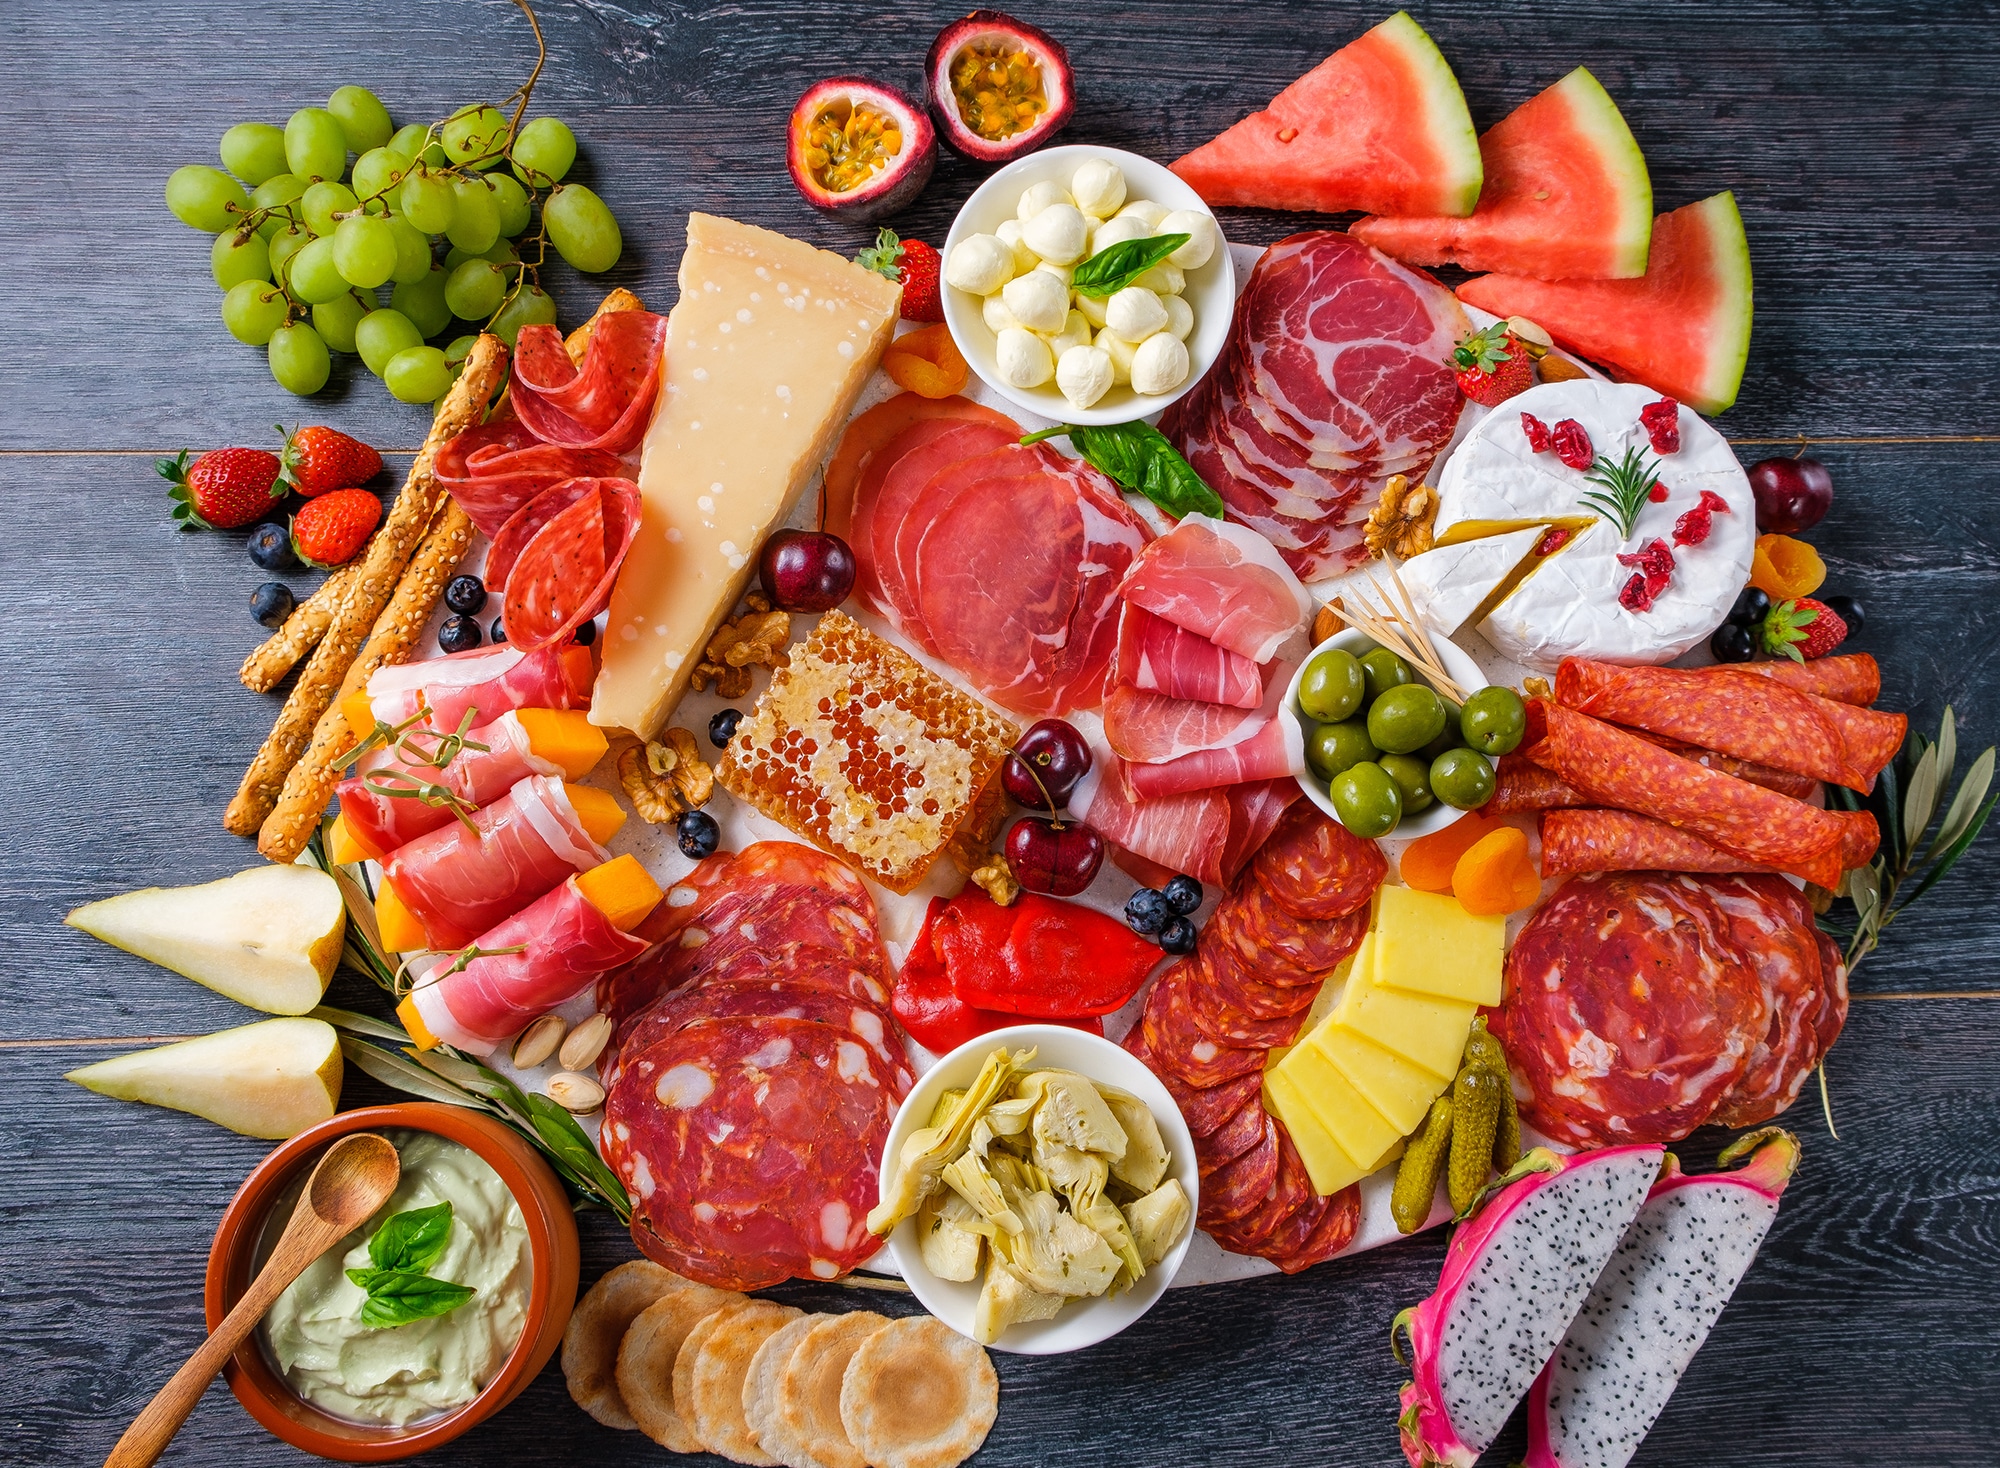 Build your summer charcuterie board